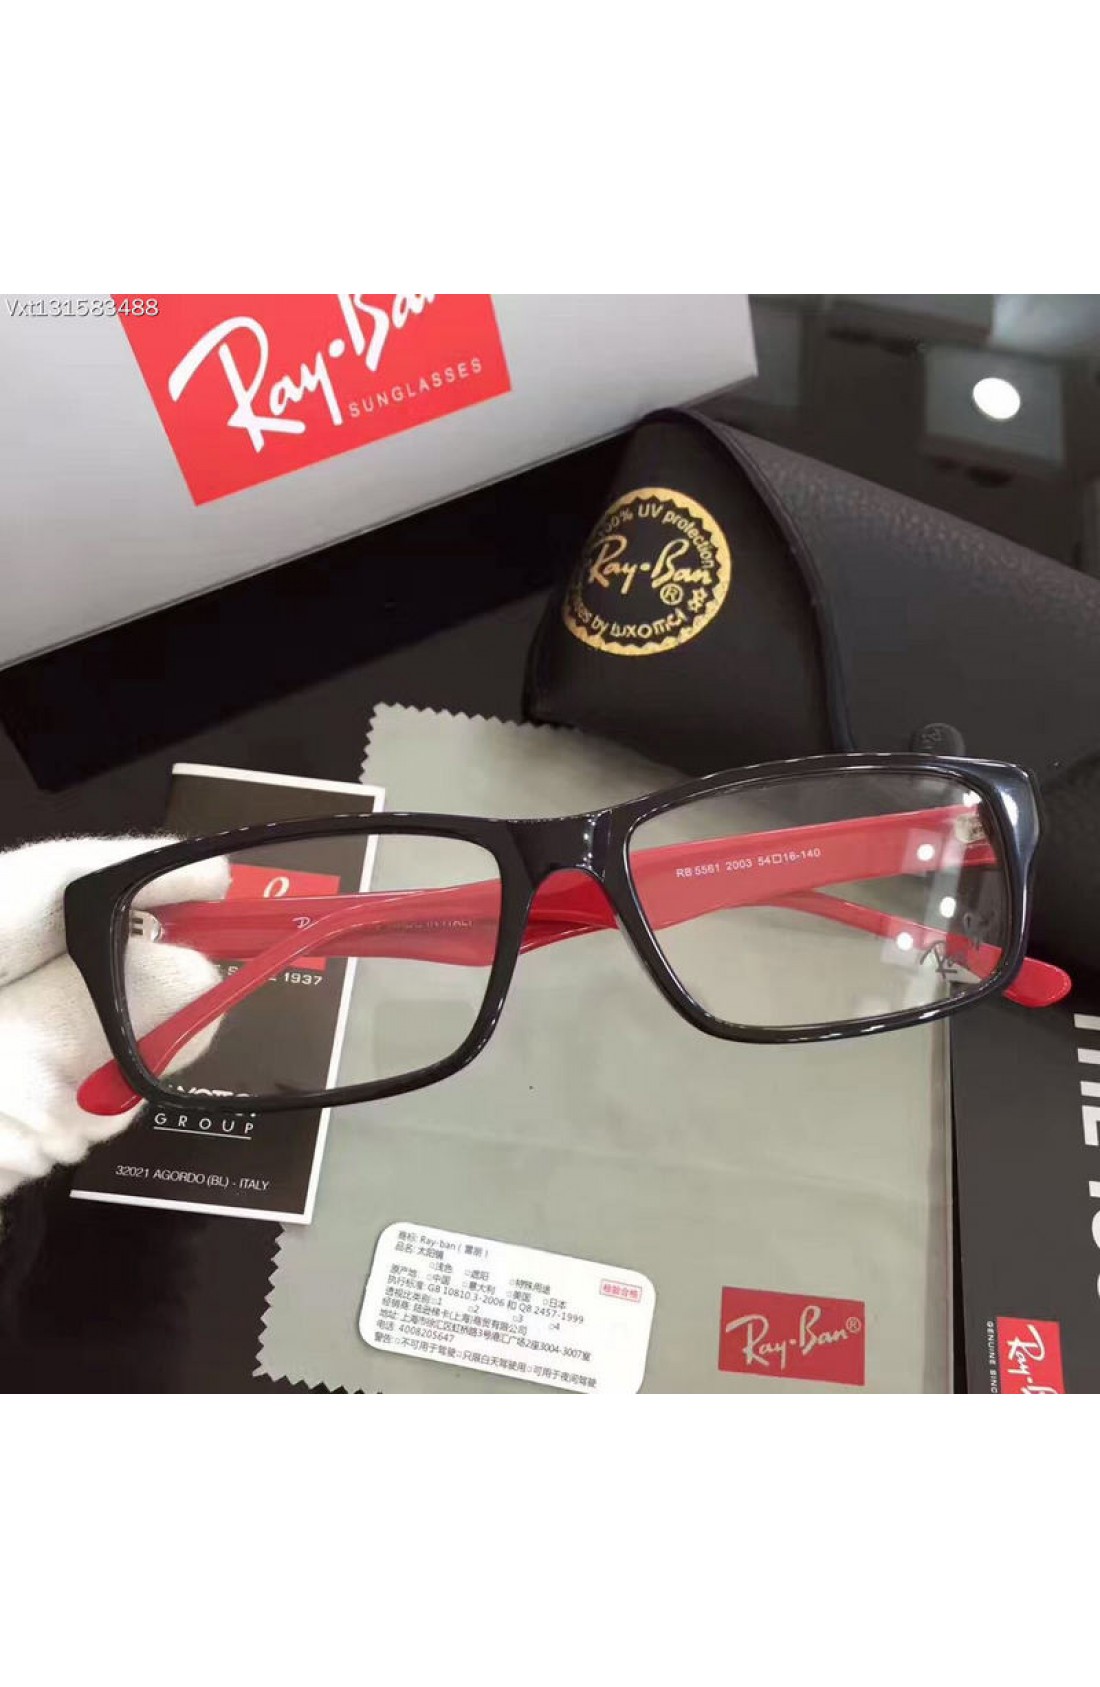 red and black ray ban sunglasses